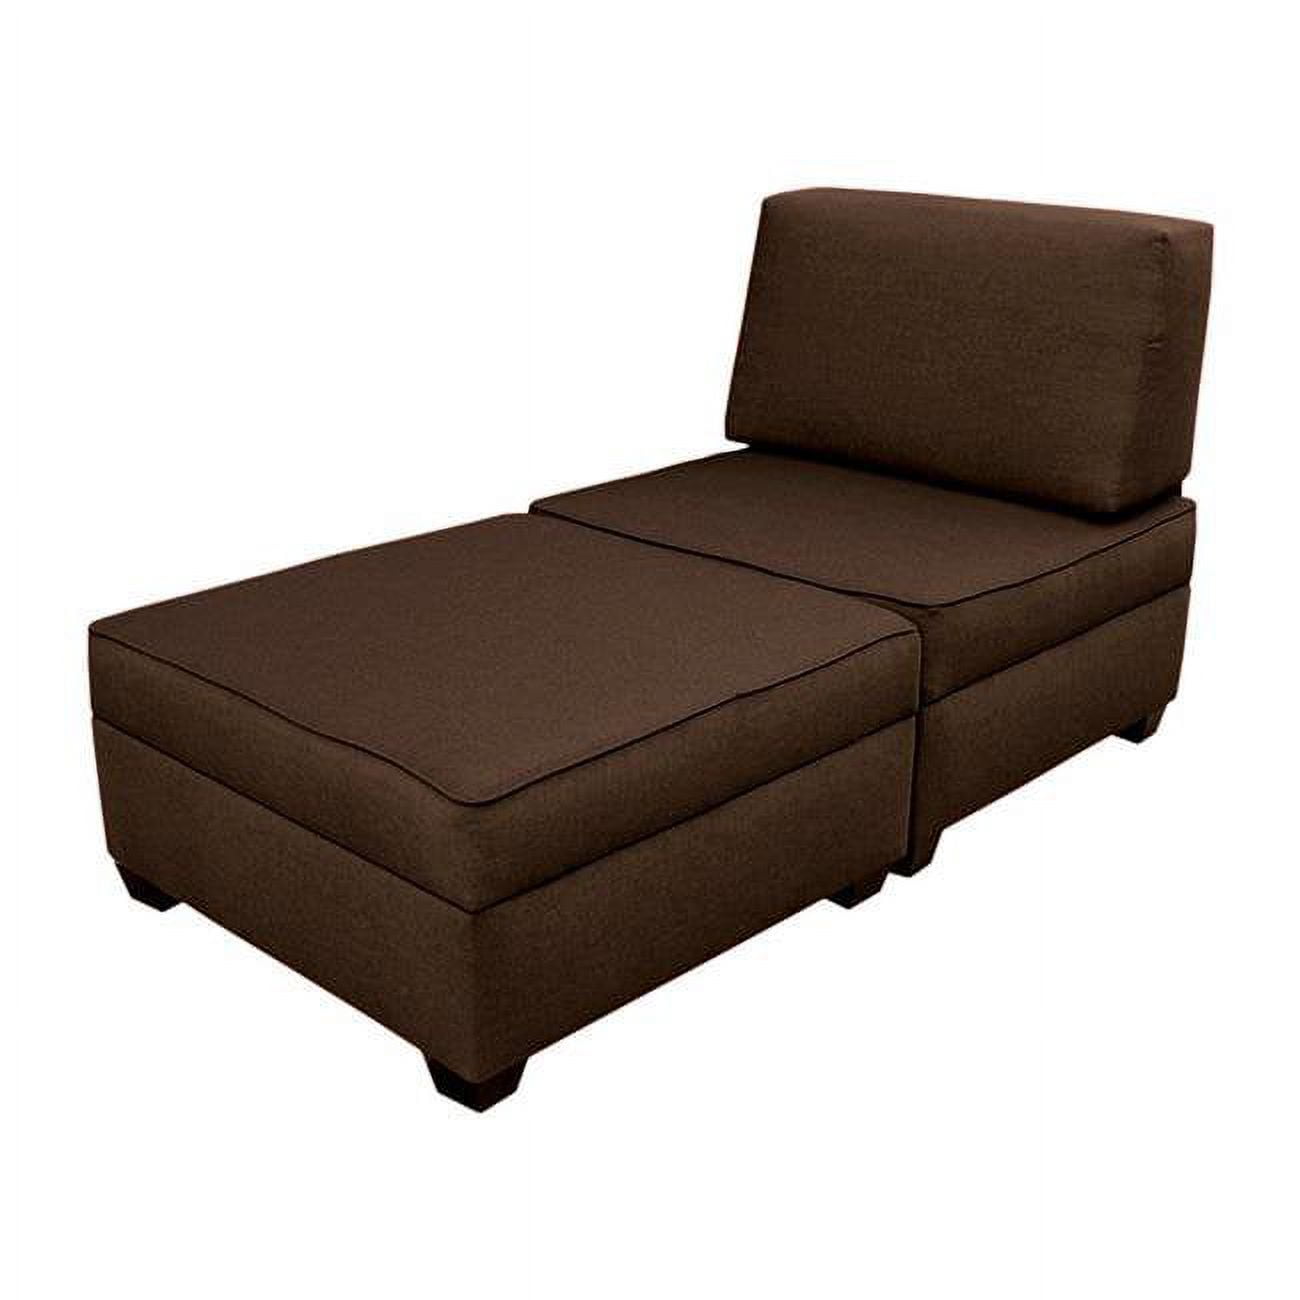 MFCL-ES 1 36 in. Chaise Lounge Plus Ottomans - Espresso -  Duobed